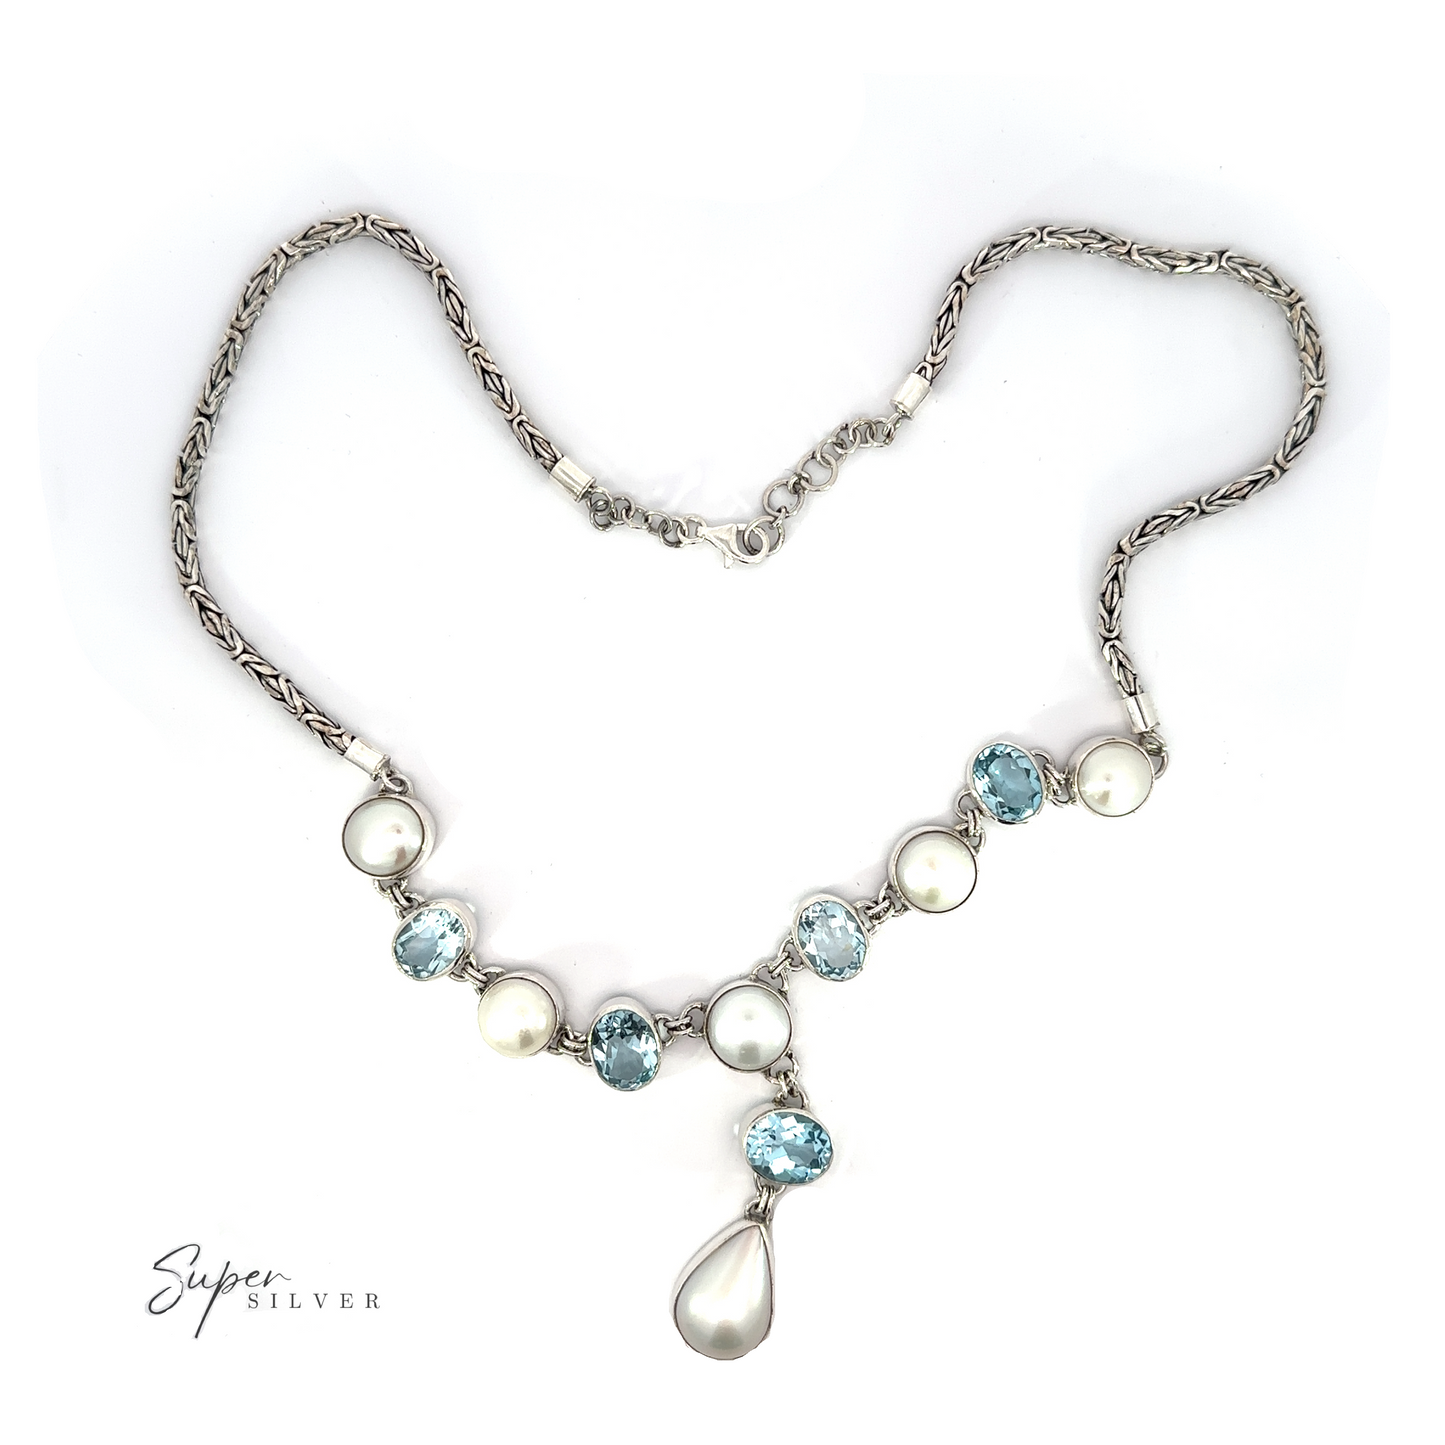 
                  
                    A Stunning Pearl and Gemstone Statement Necklace featuring a combination of gemstones and pearls with a single pearl drop pendant, displayed on a white background. The brand "Super Silver" is visible in the bottom corner.
                  
                